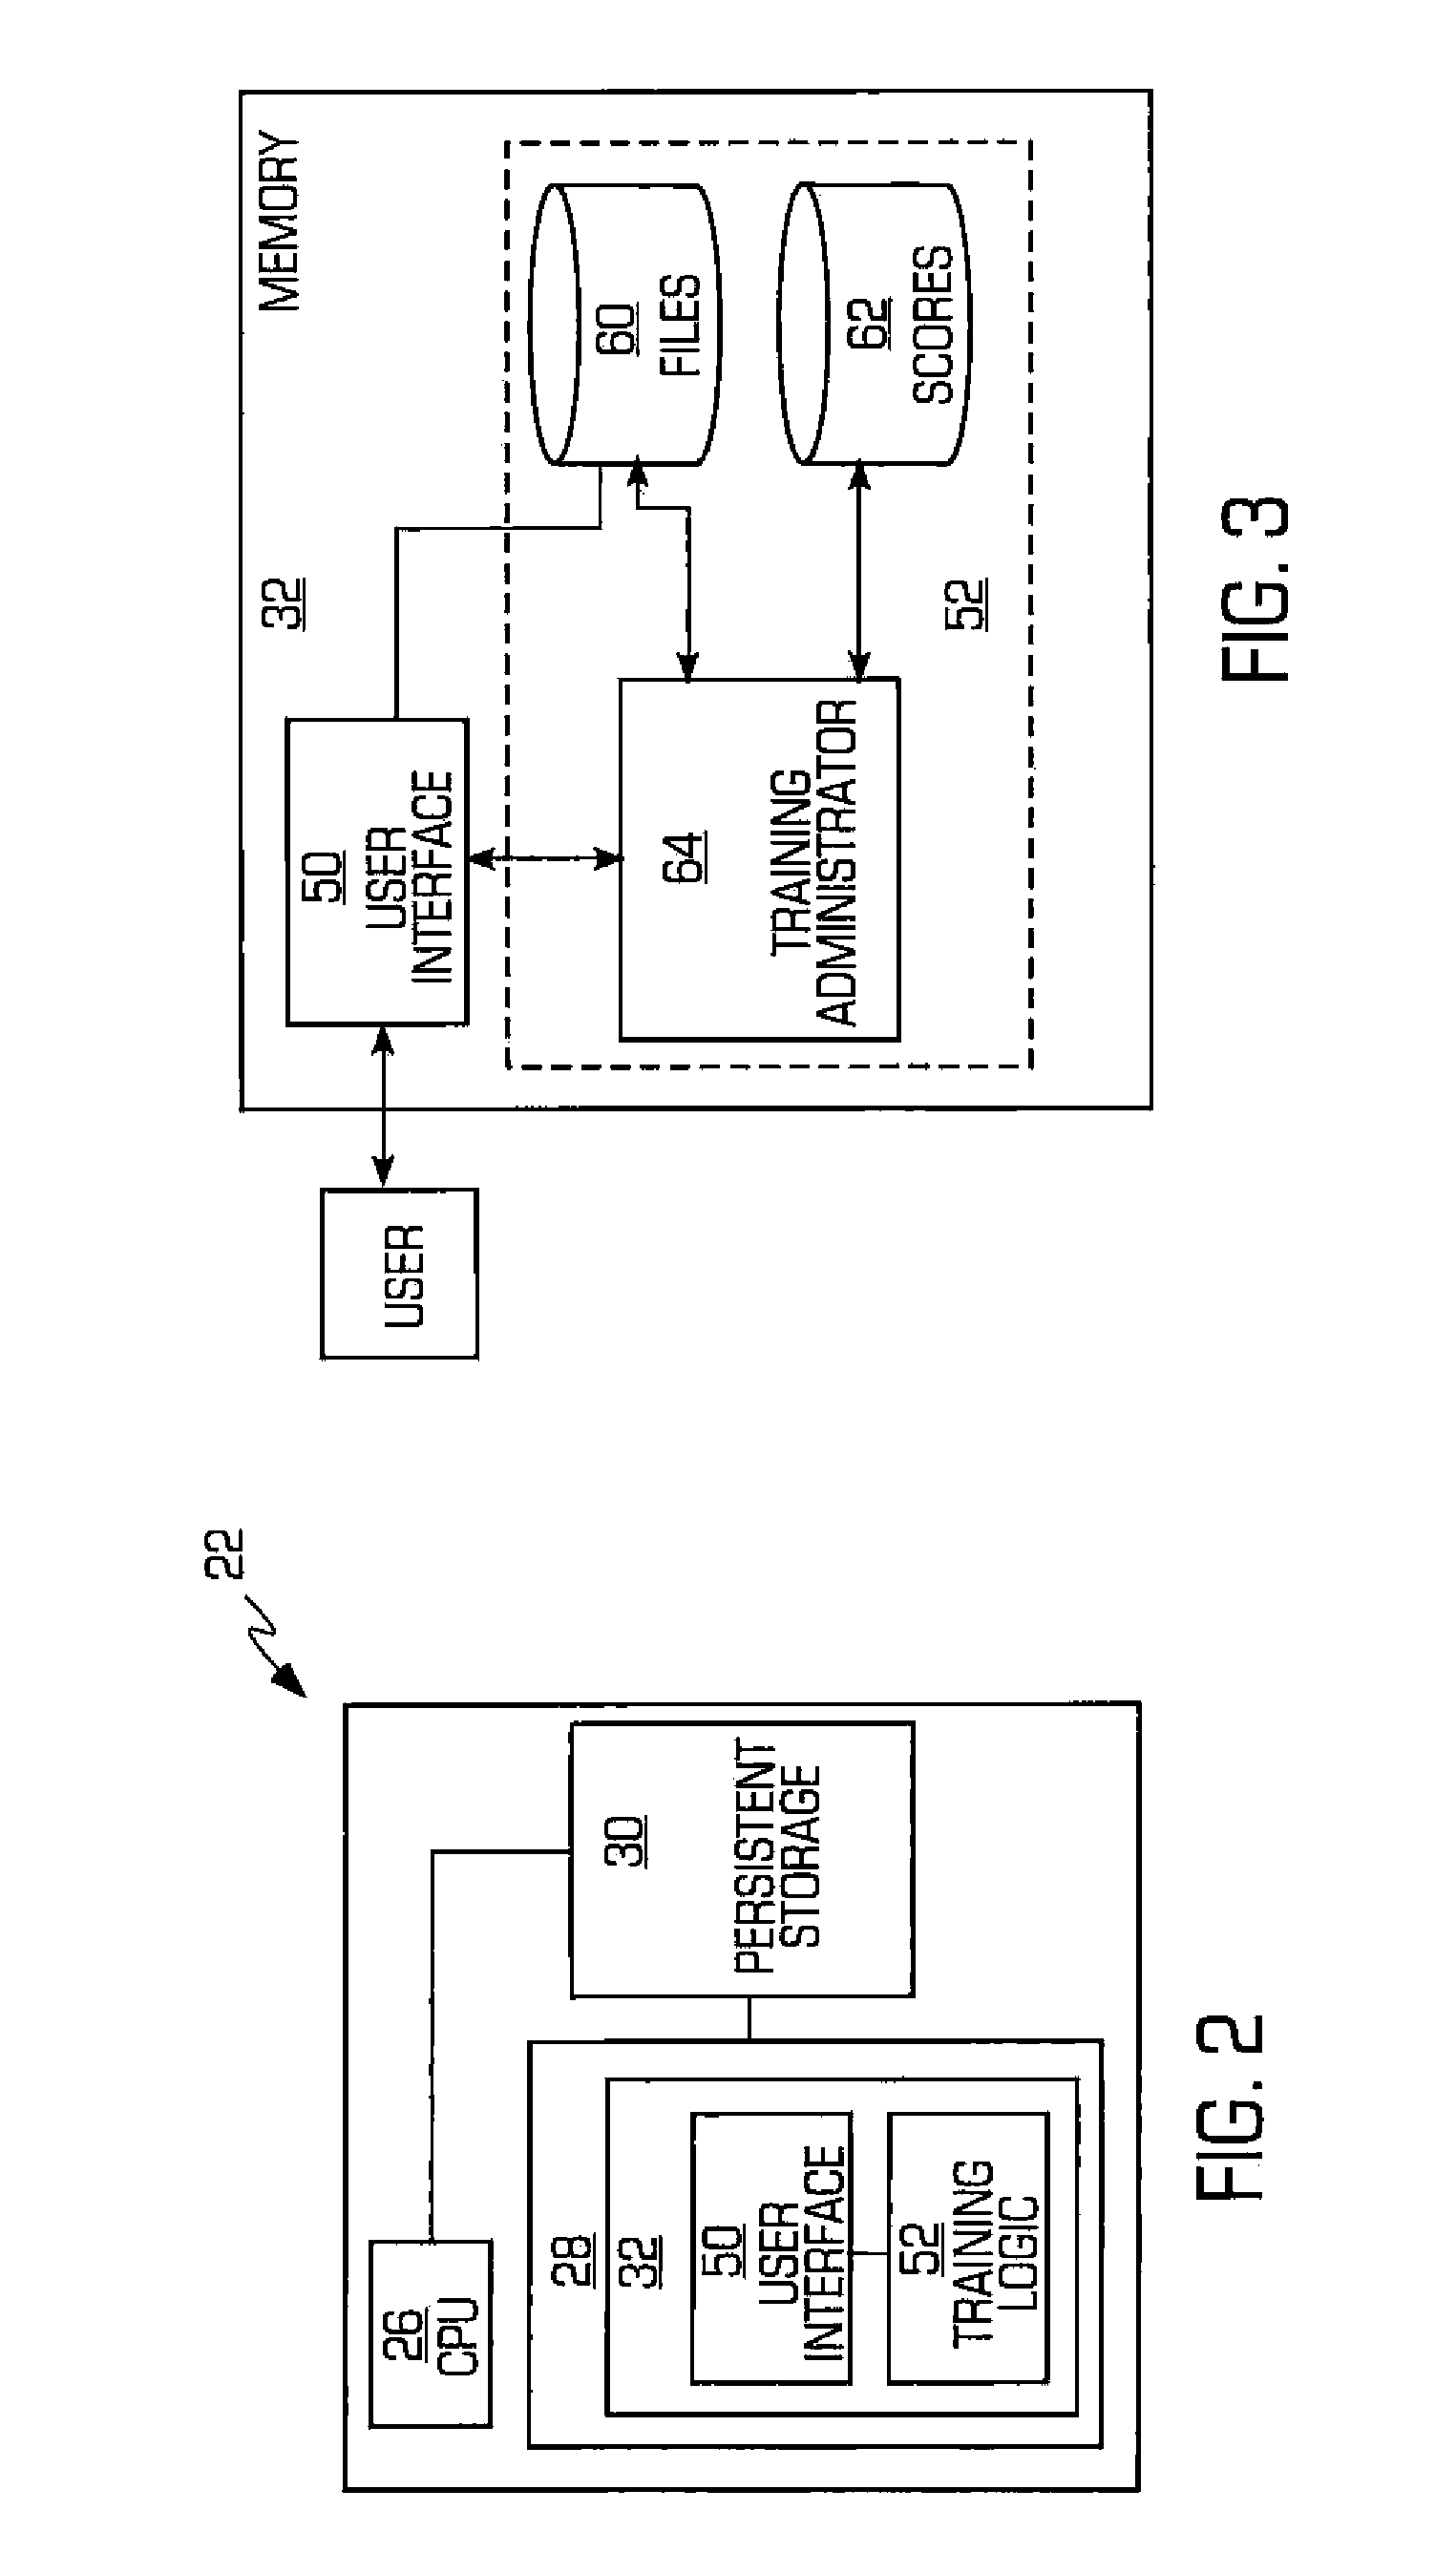 Computer usage management system and method